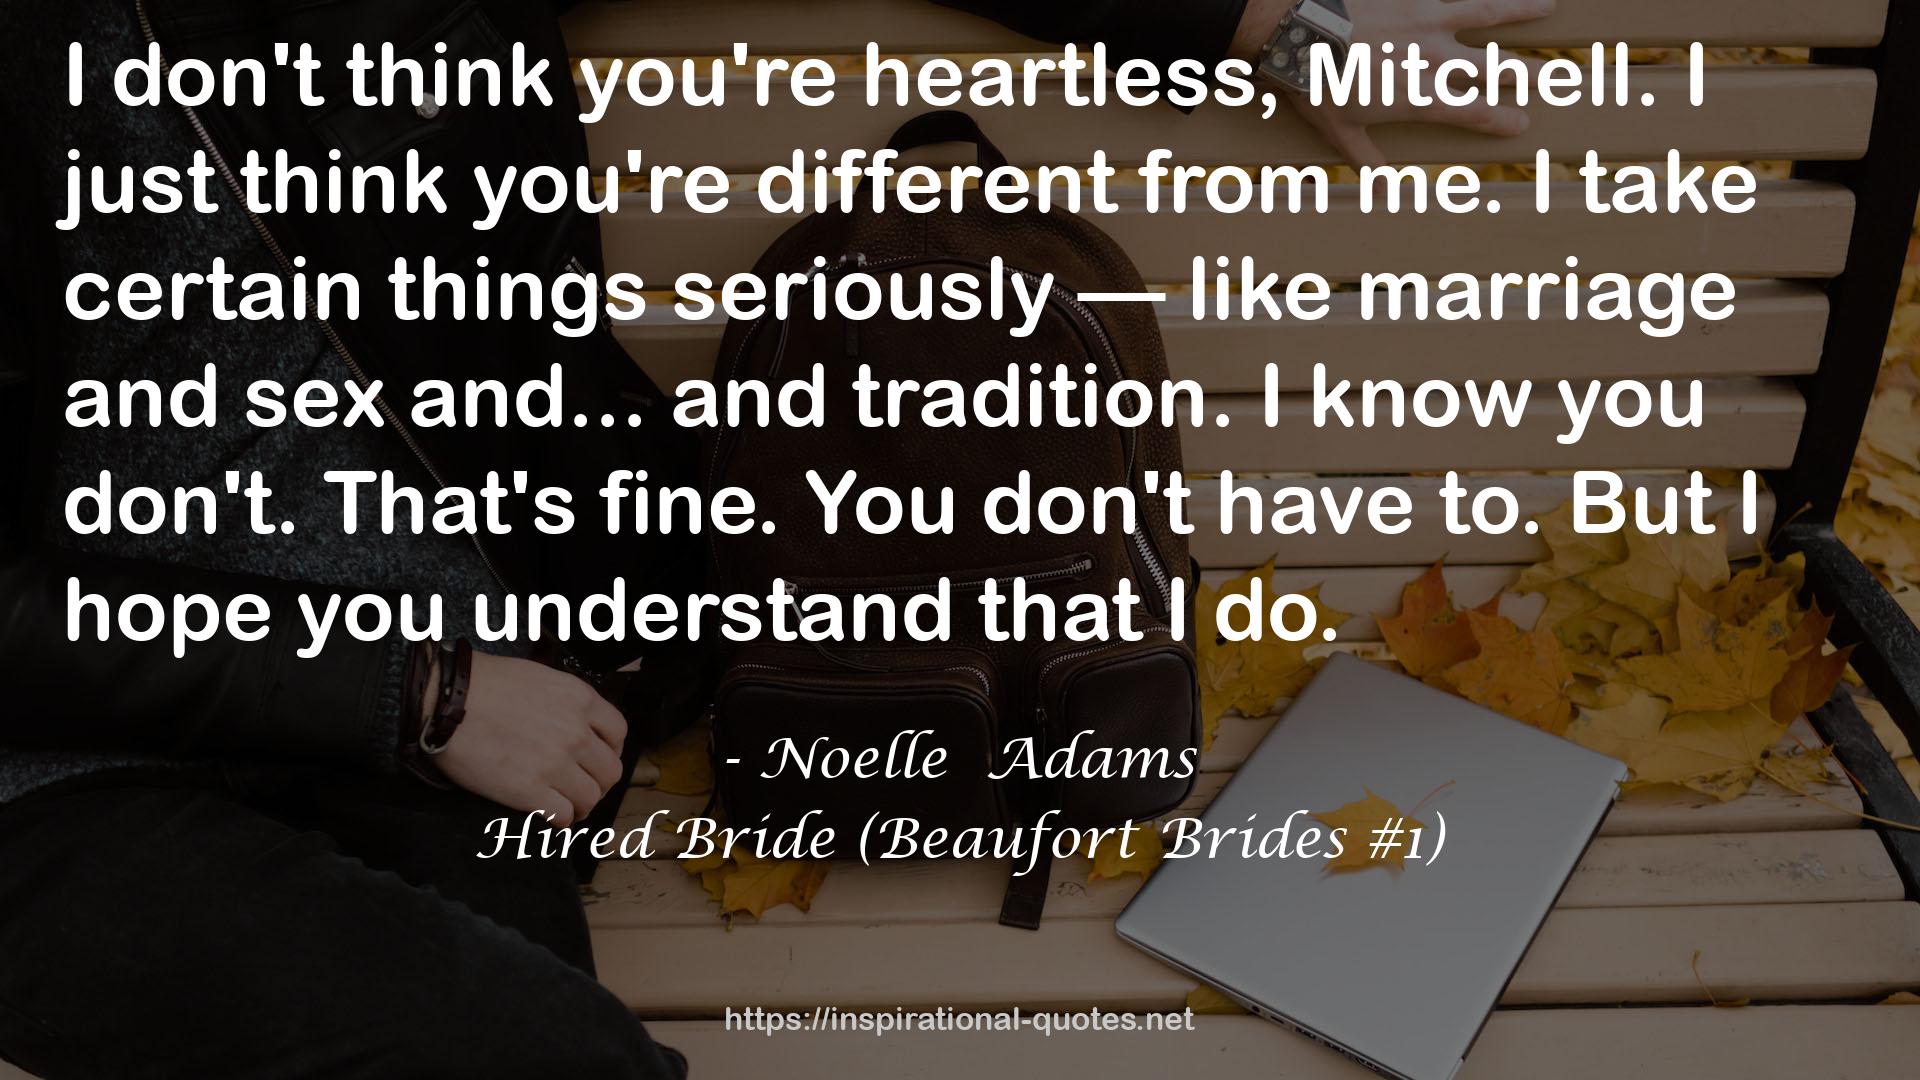 Hired Bride (Beaufort Brides #1) QUOTES